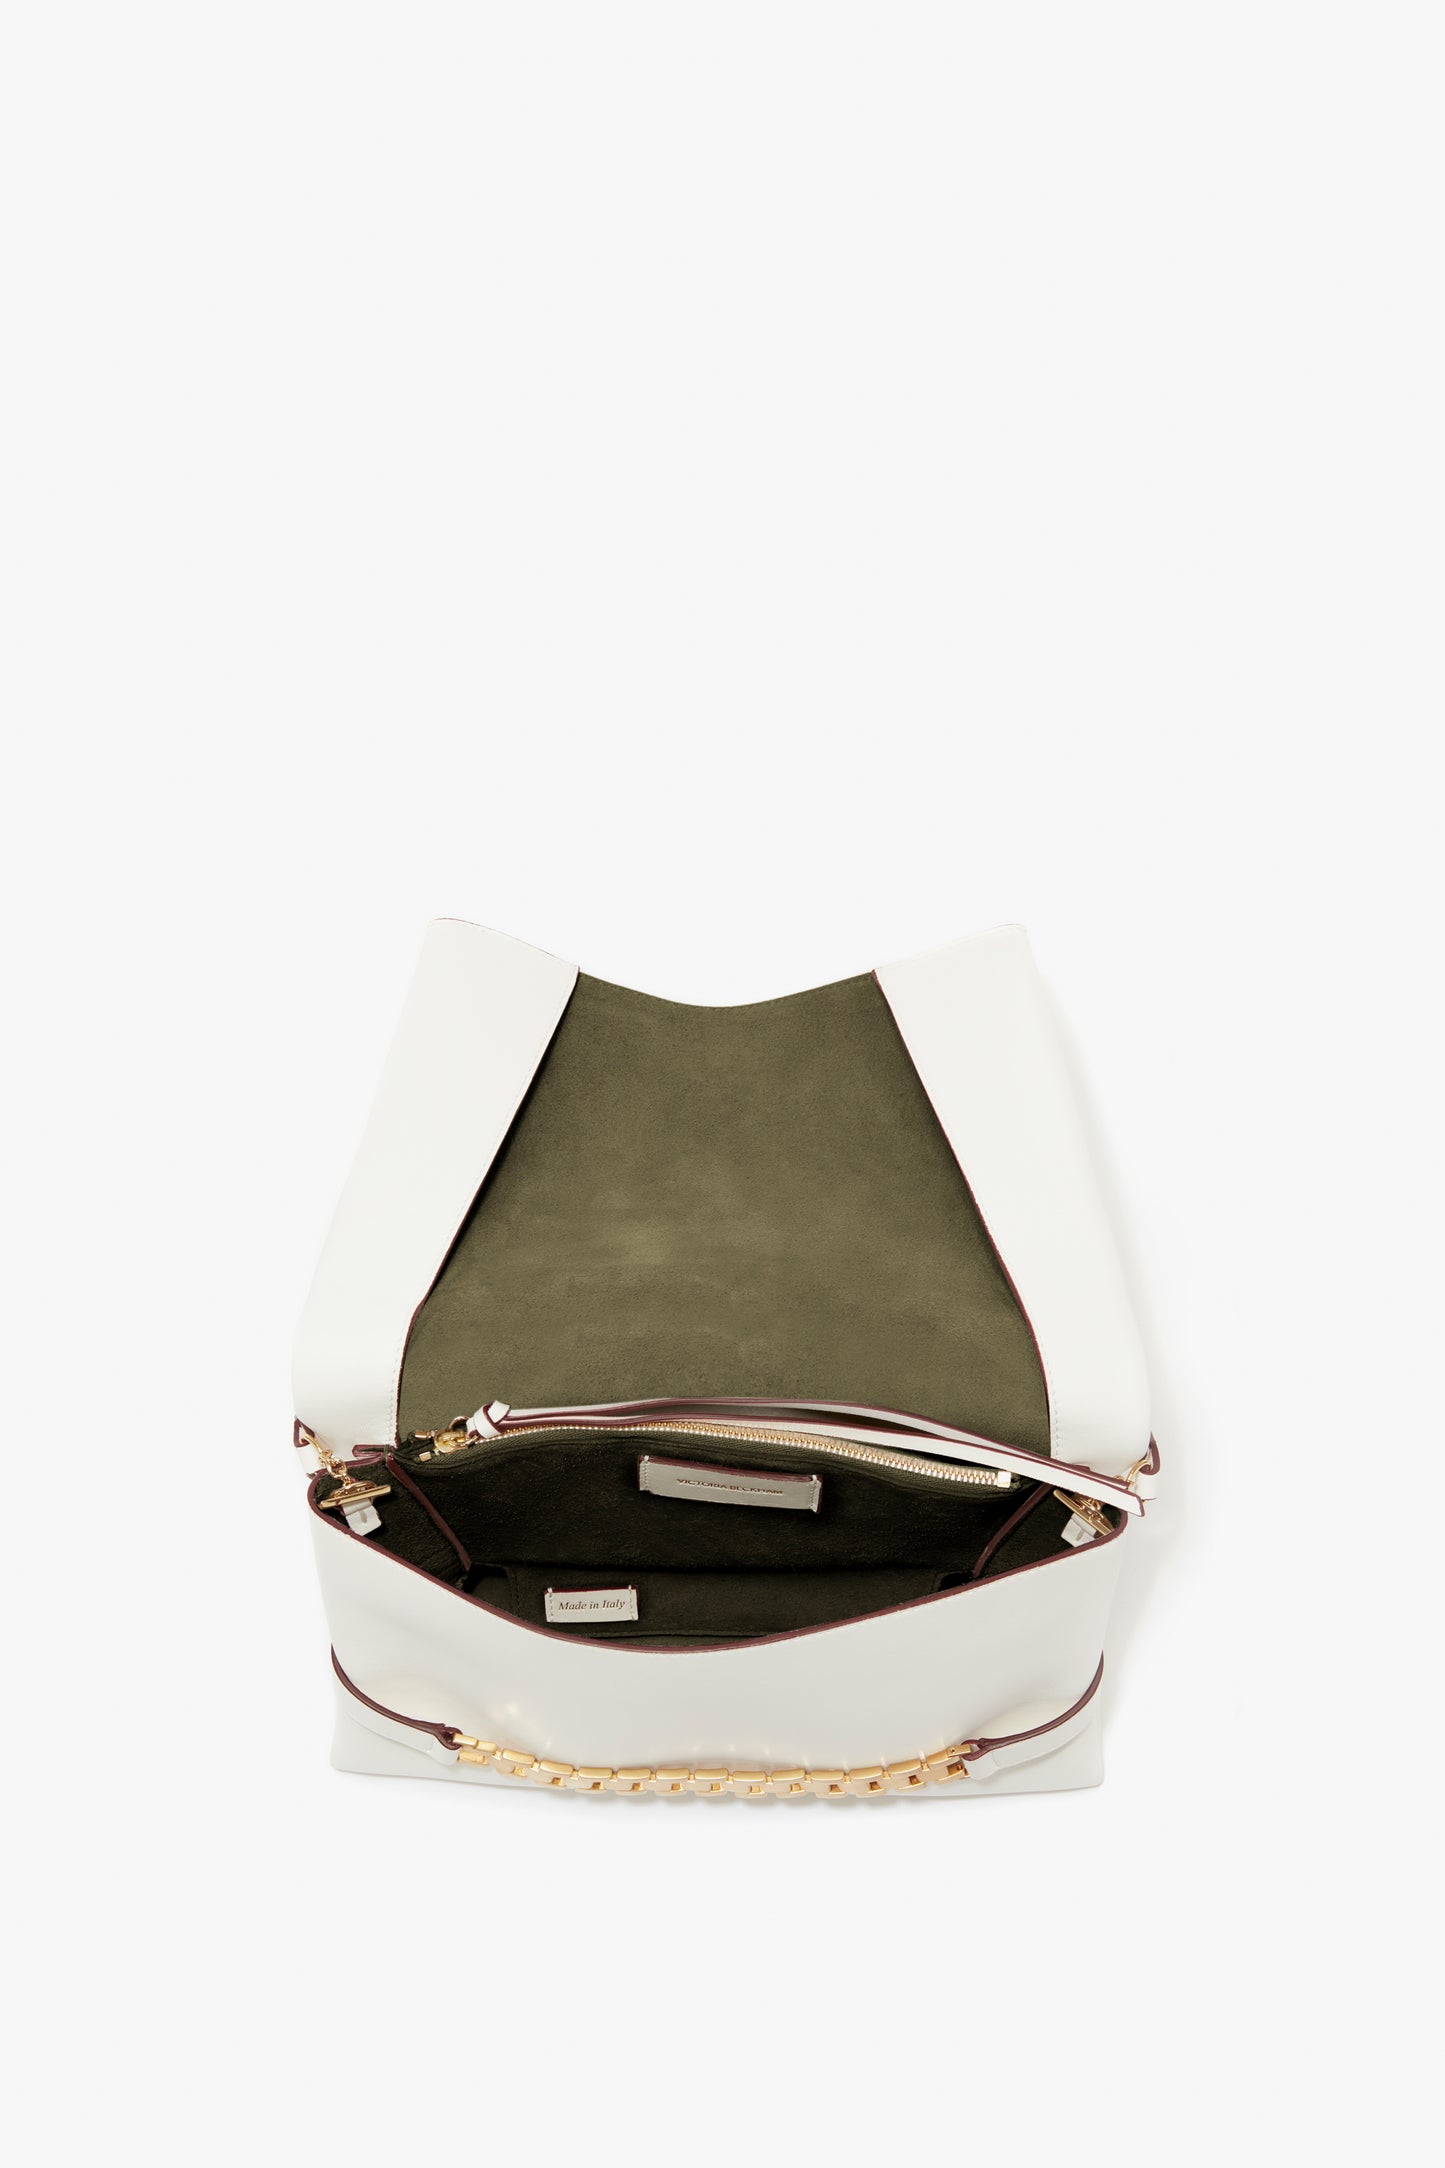 Chain Pouch with Strap In White Leather designer handbag by Victoria Beckham, featuring a front flap open, green interior, and small interior pocket.